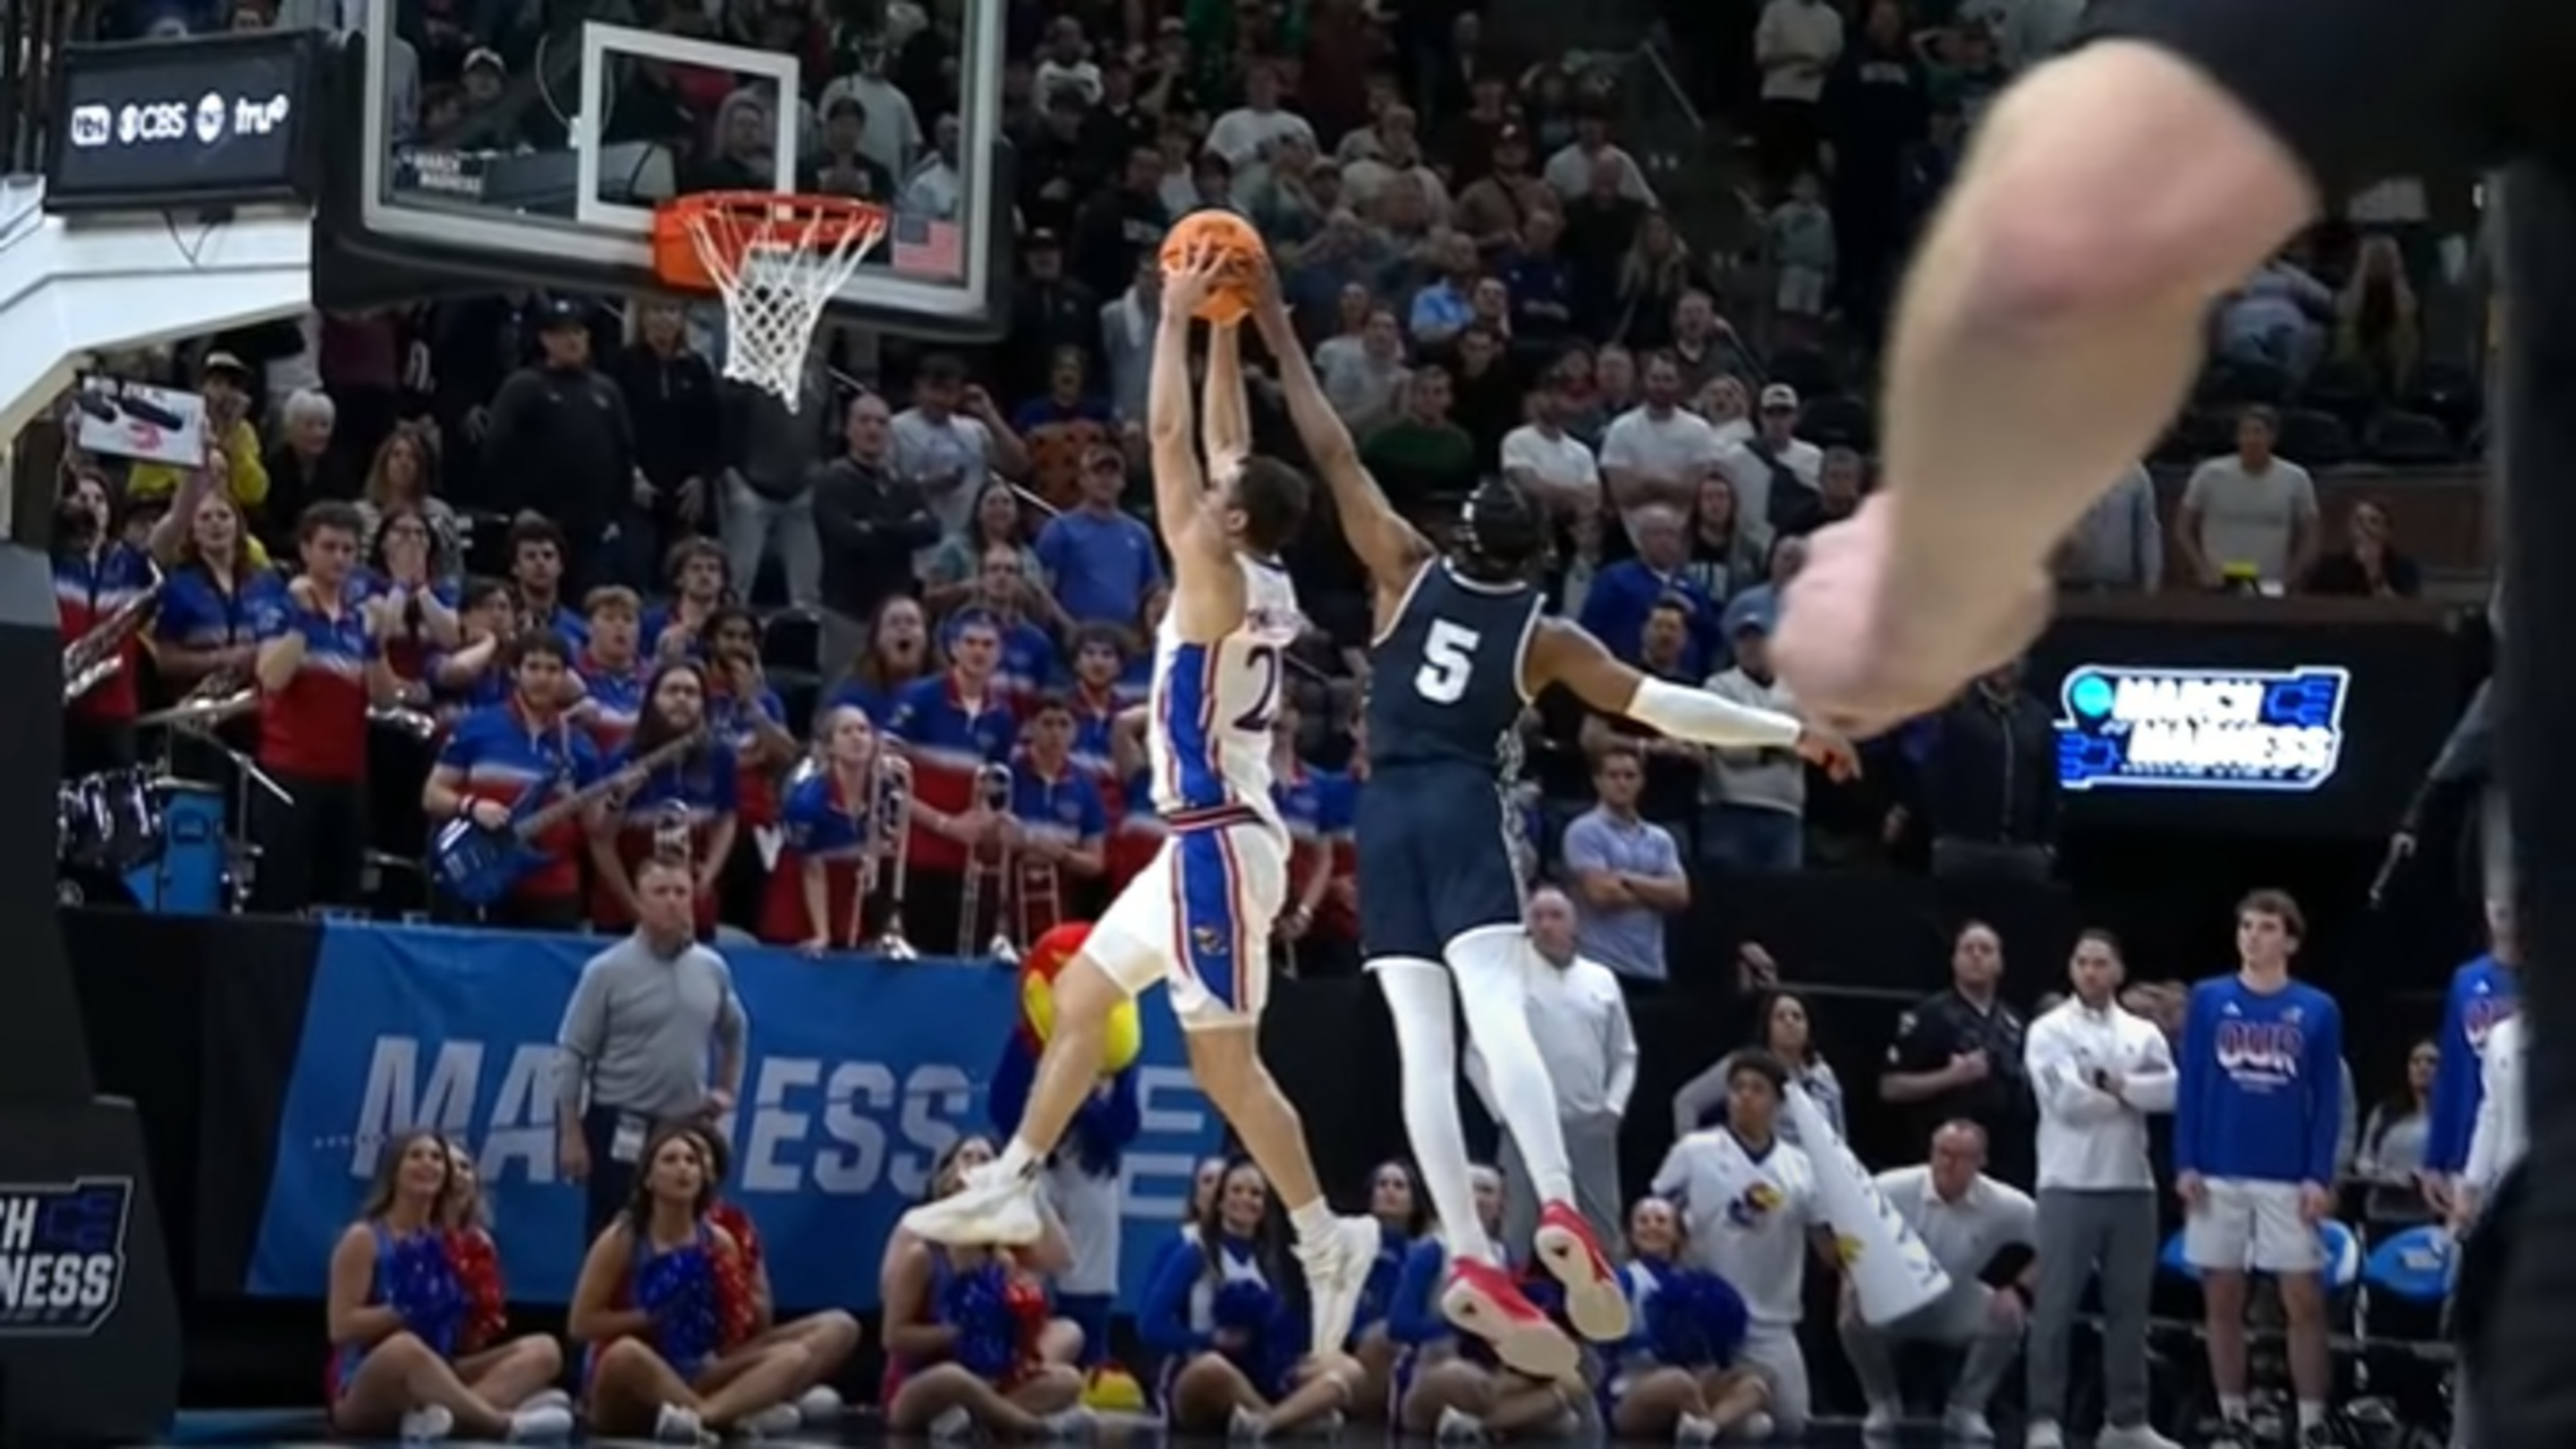 Samford Utterly Screwed By Refs In Loss to Kansas